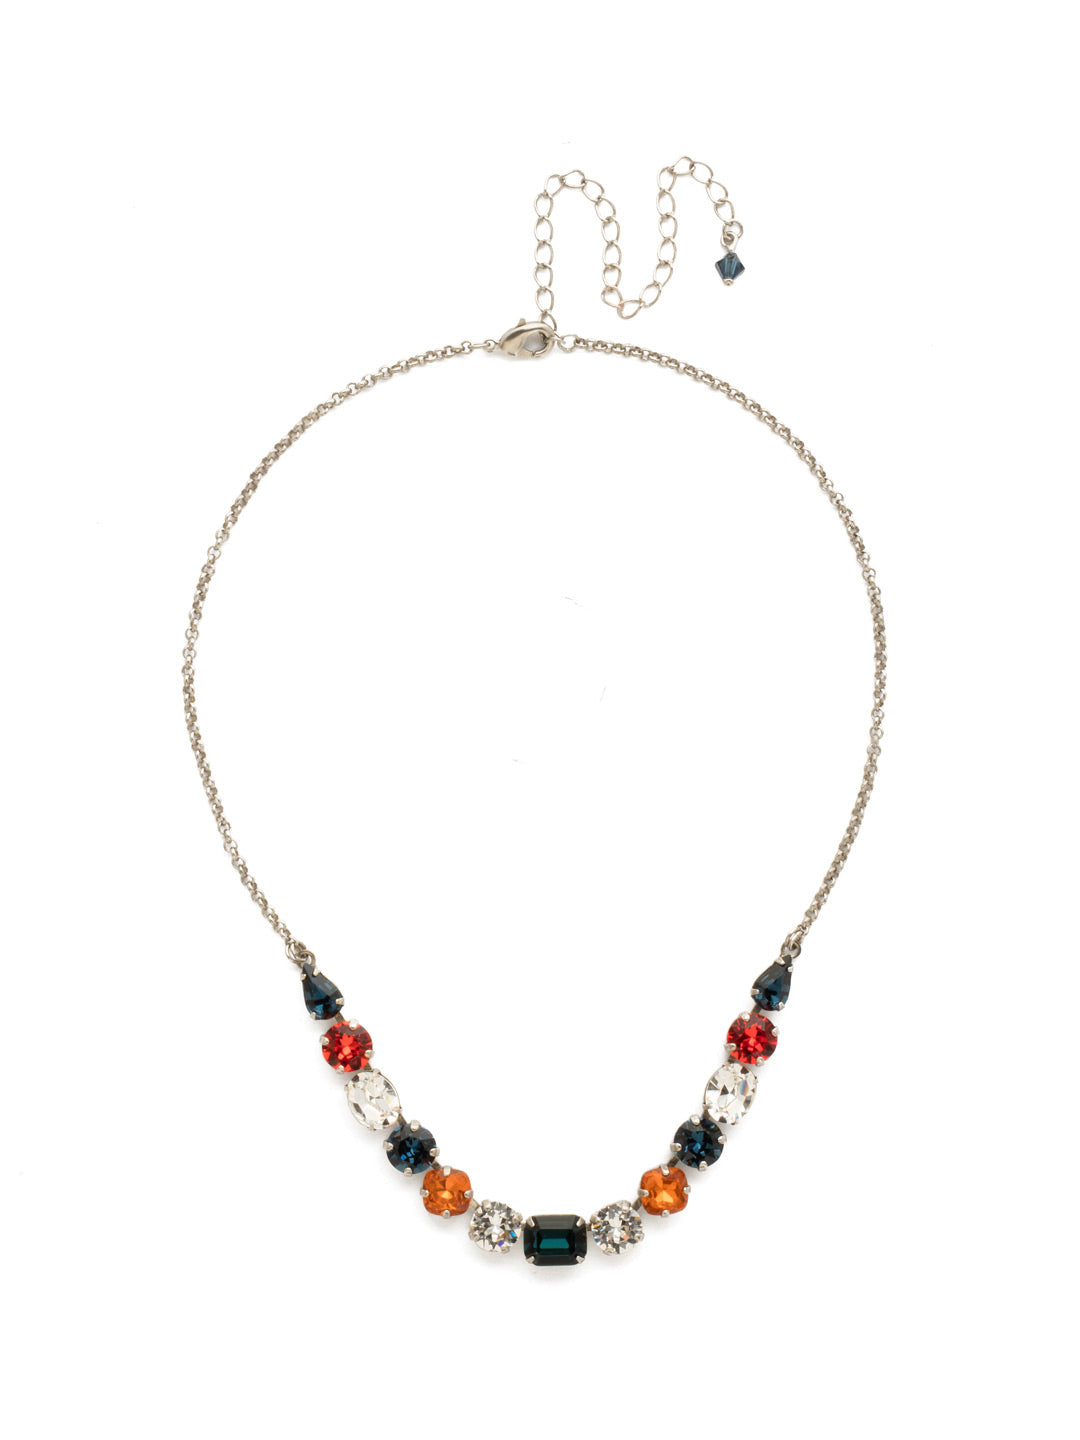 Tansy Half Line Tennis Necklace - NDQ14ASBTB - <p>Oval, round, emerald, pear and cushion cut crystals are accented by a delicate chain for subtle sparkle that looks great layered or worn solo. From Sorrelli's Battle Blue collection in our Antique Silver-tone finish.</p>